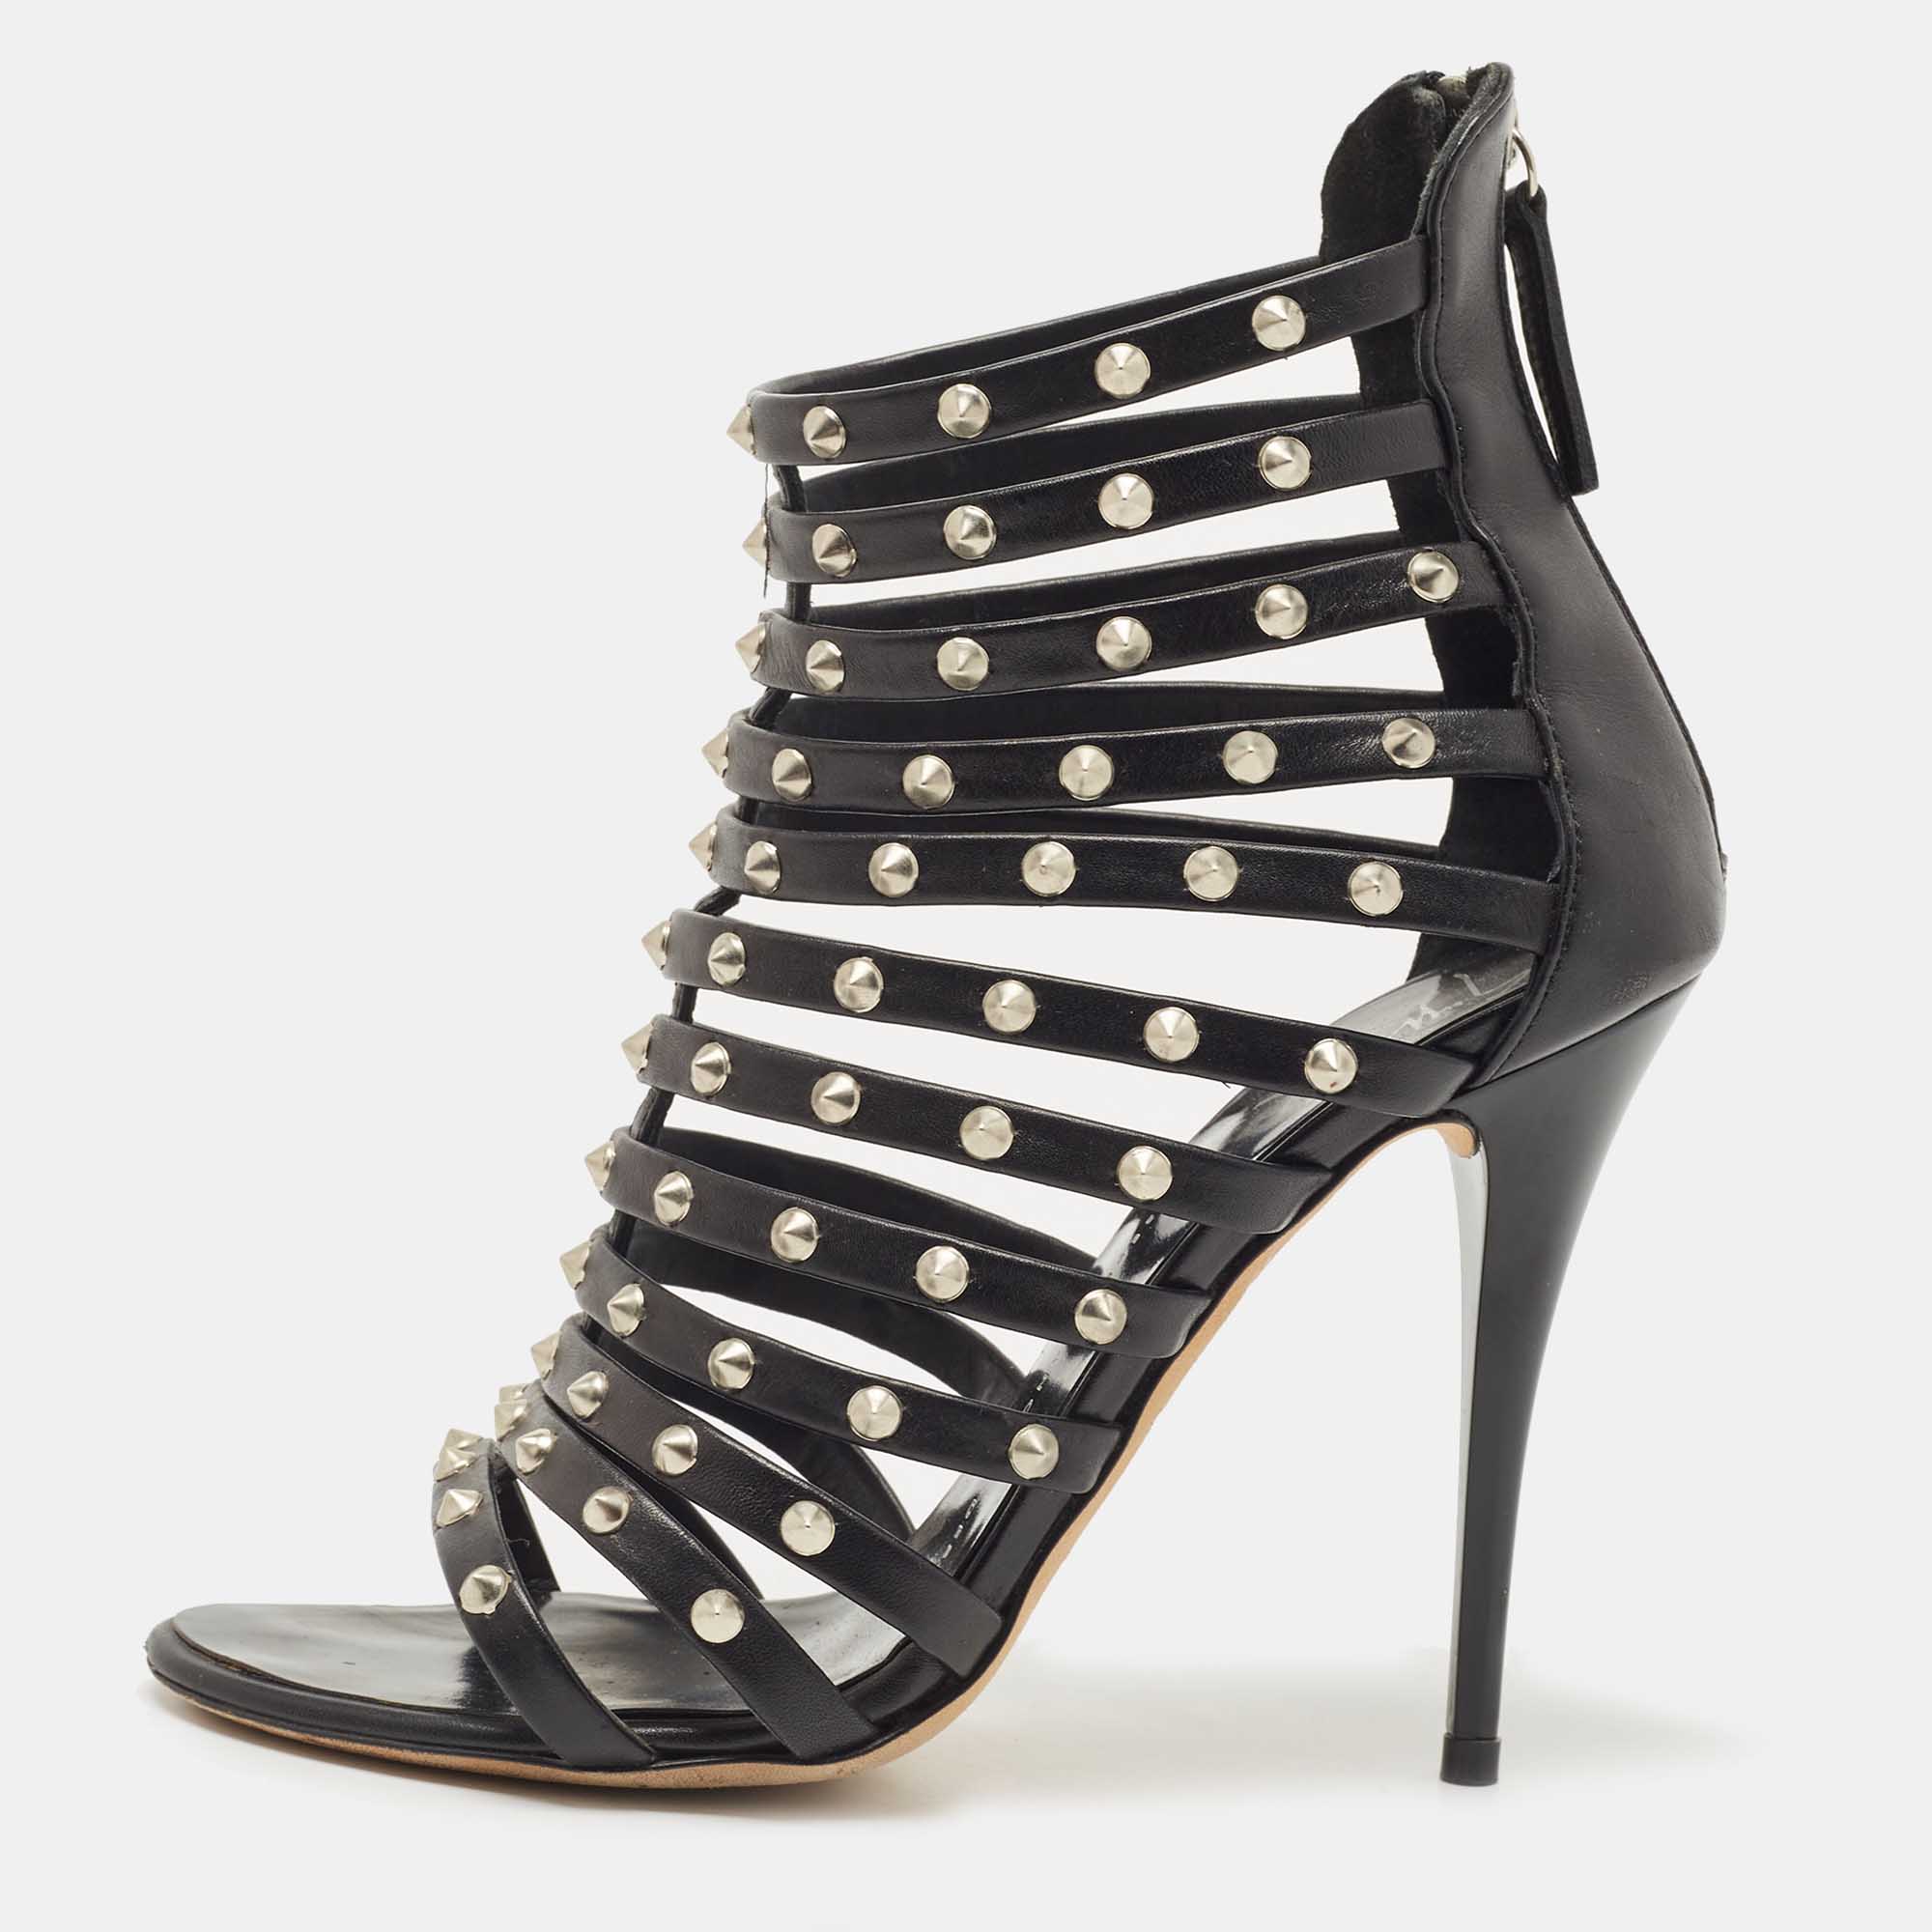 Pre-owned Giuseppe Zanotti Black Leather Studded Strappy Sandals Size 36.5